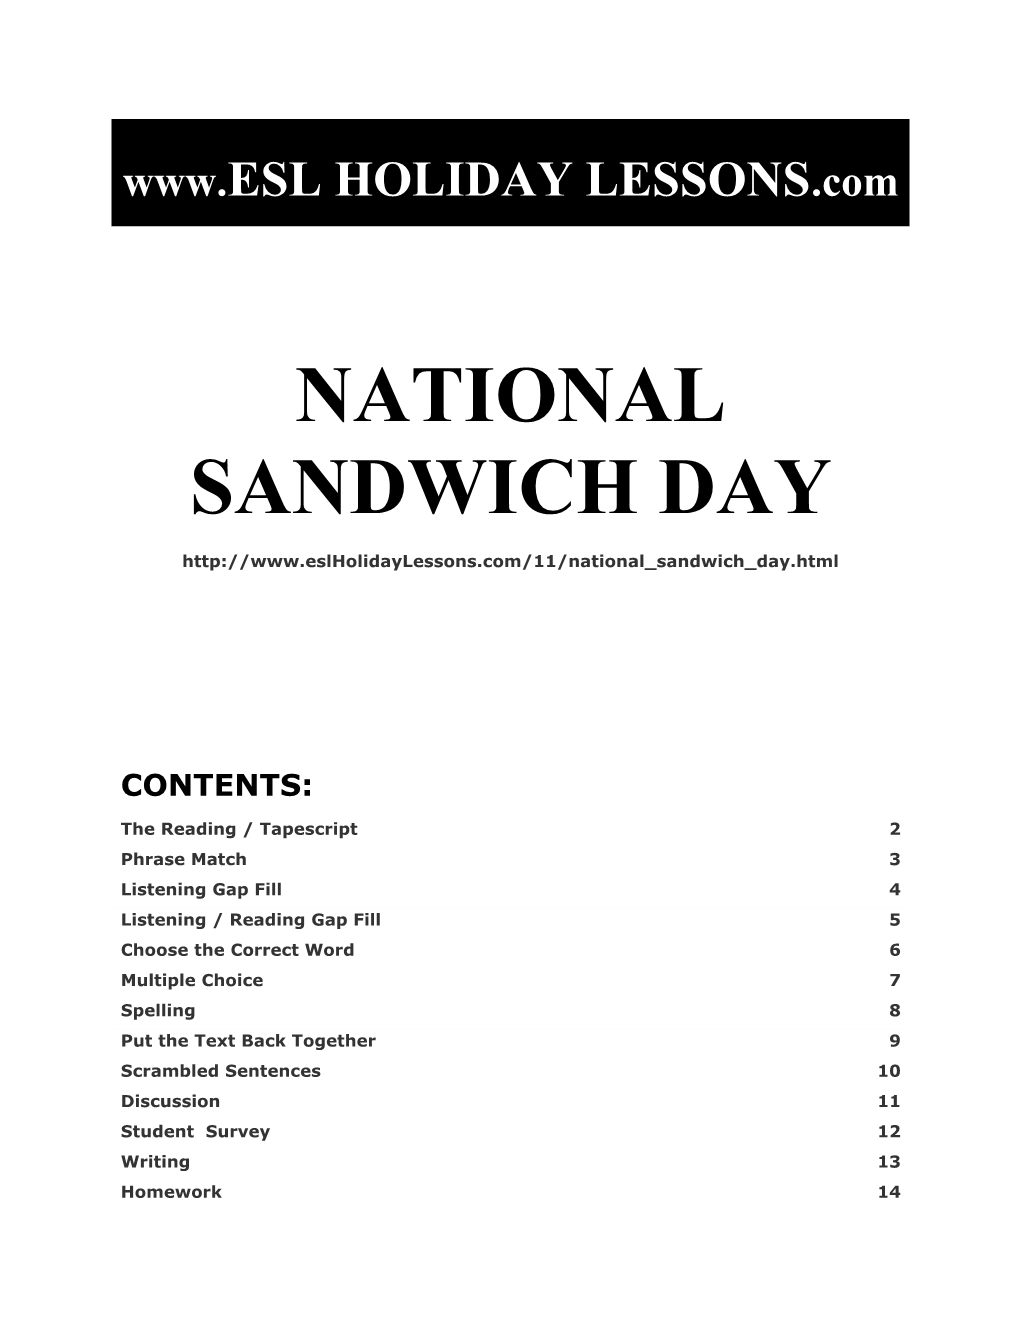 Holiday Lessons - National Sandwich Day